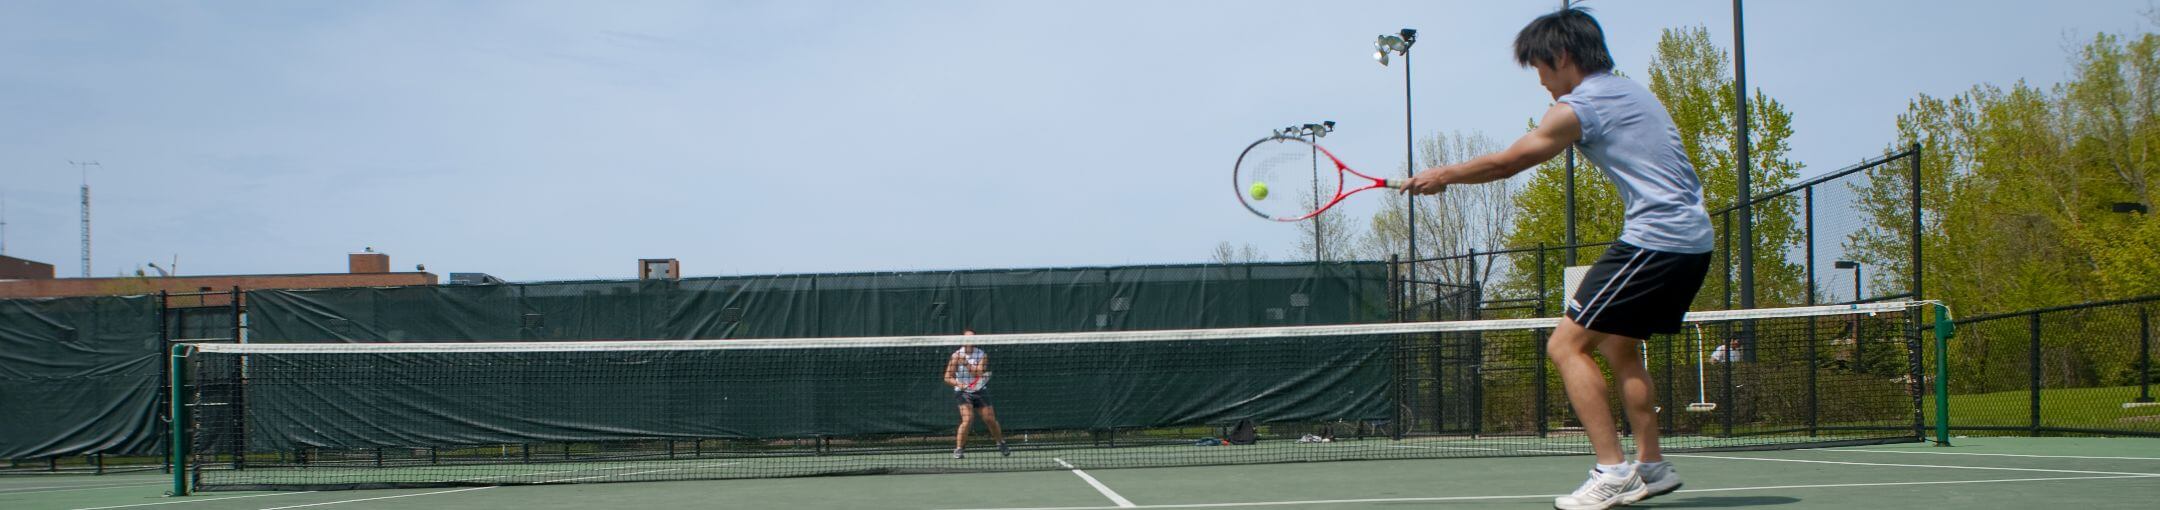 Two people playing tennis.